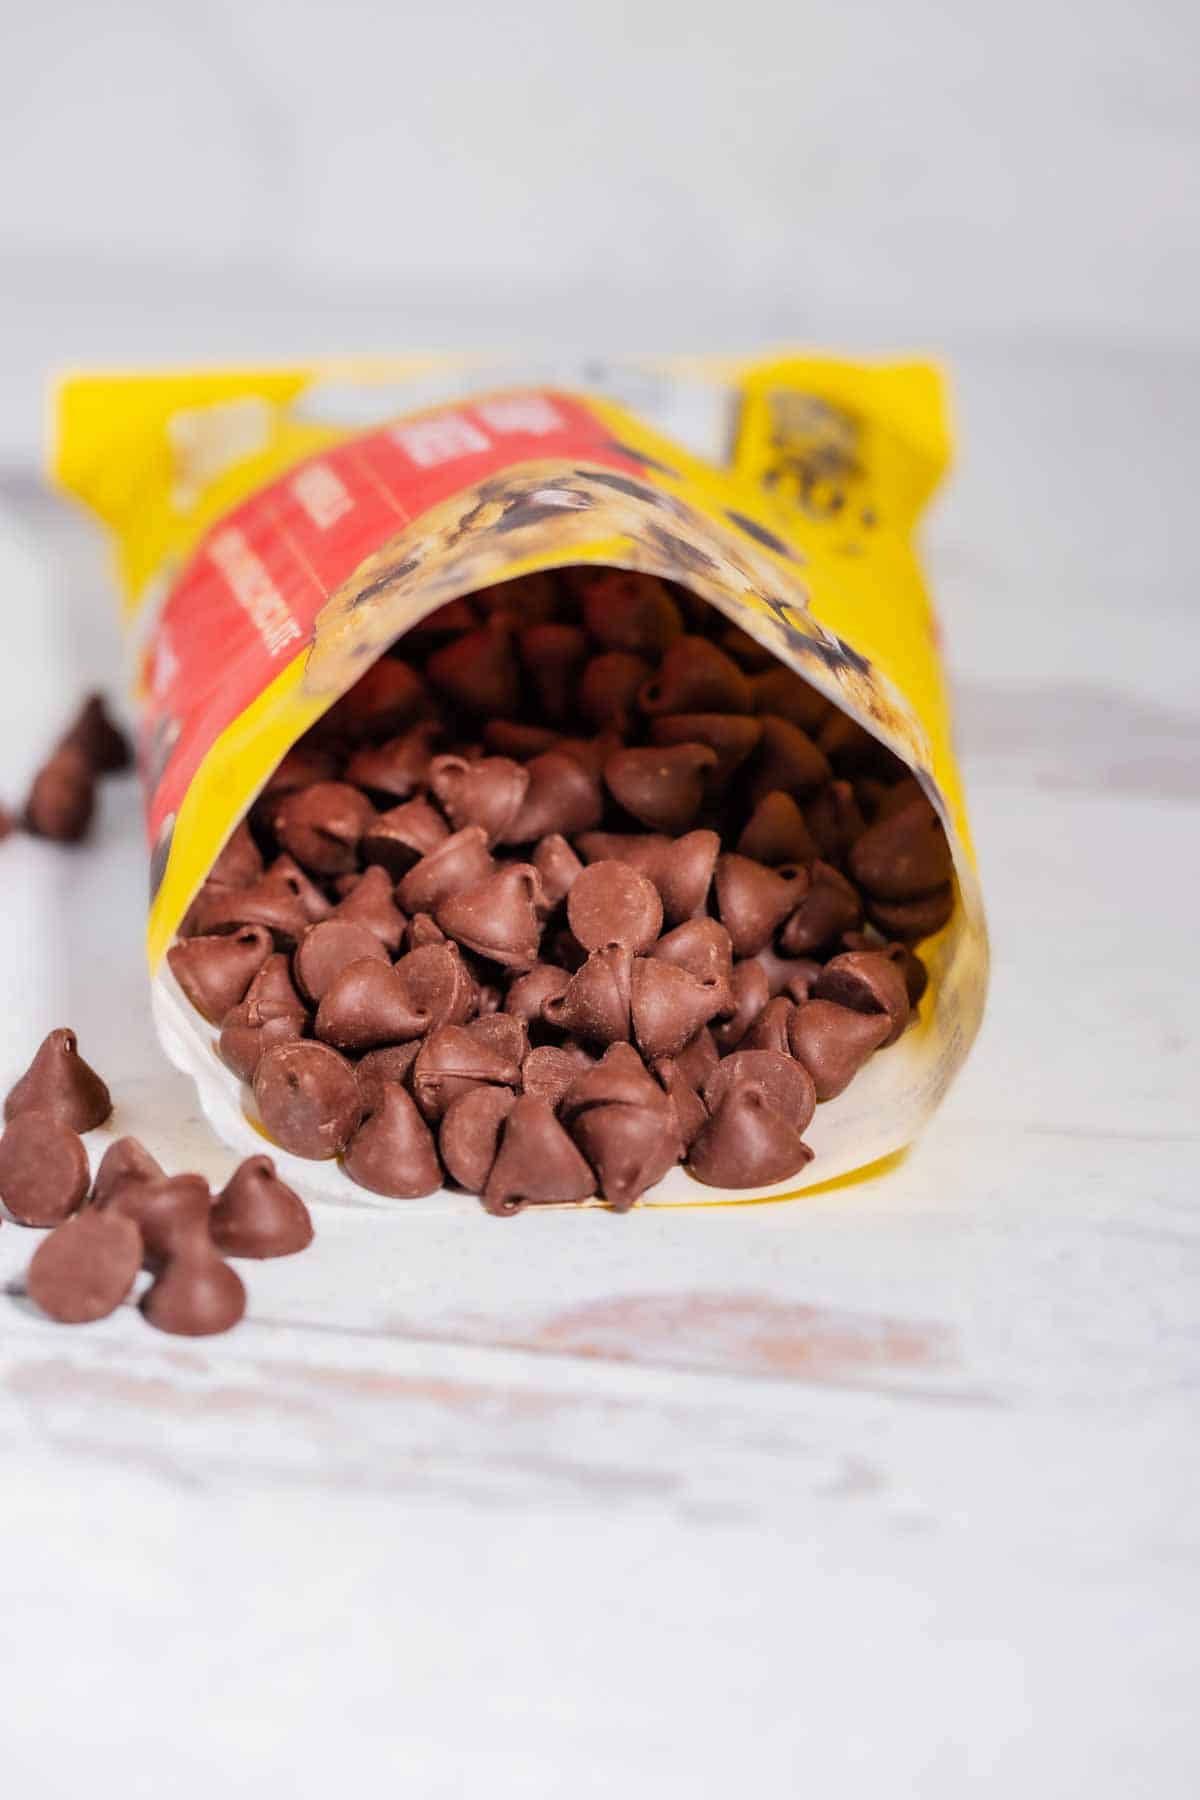 Open bag of Nestle Toll House chocolate chips.